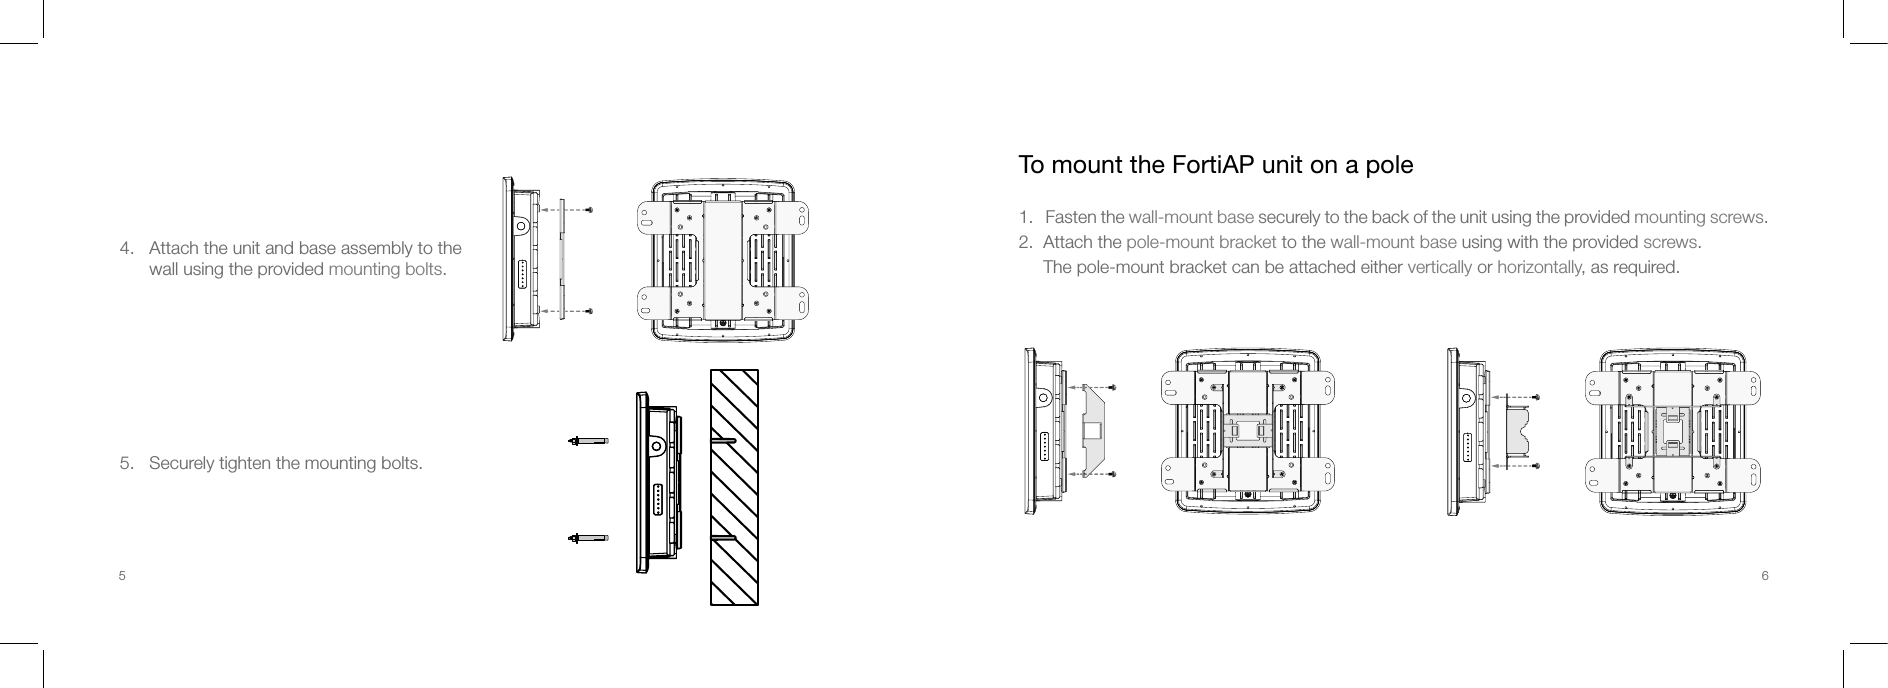 4.   Attach the unit and base assembly to the       wall using the provided mounting bolts.5.   Securely tighten the mounting bolts.To mount the FortiAP unit on a pole1.   Fasten the wall-mount base securely to the back of the unit using the provided mounting screws.2.  Attach the pole-mount bracket to the wall-mount base using with the provided screws.     The pole-mount bracket can be attached either vertically or horizontally, as required.5 6